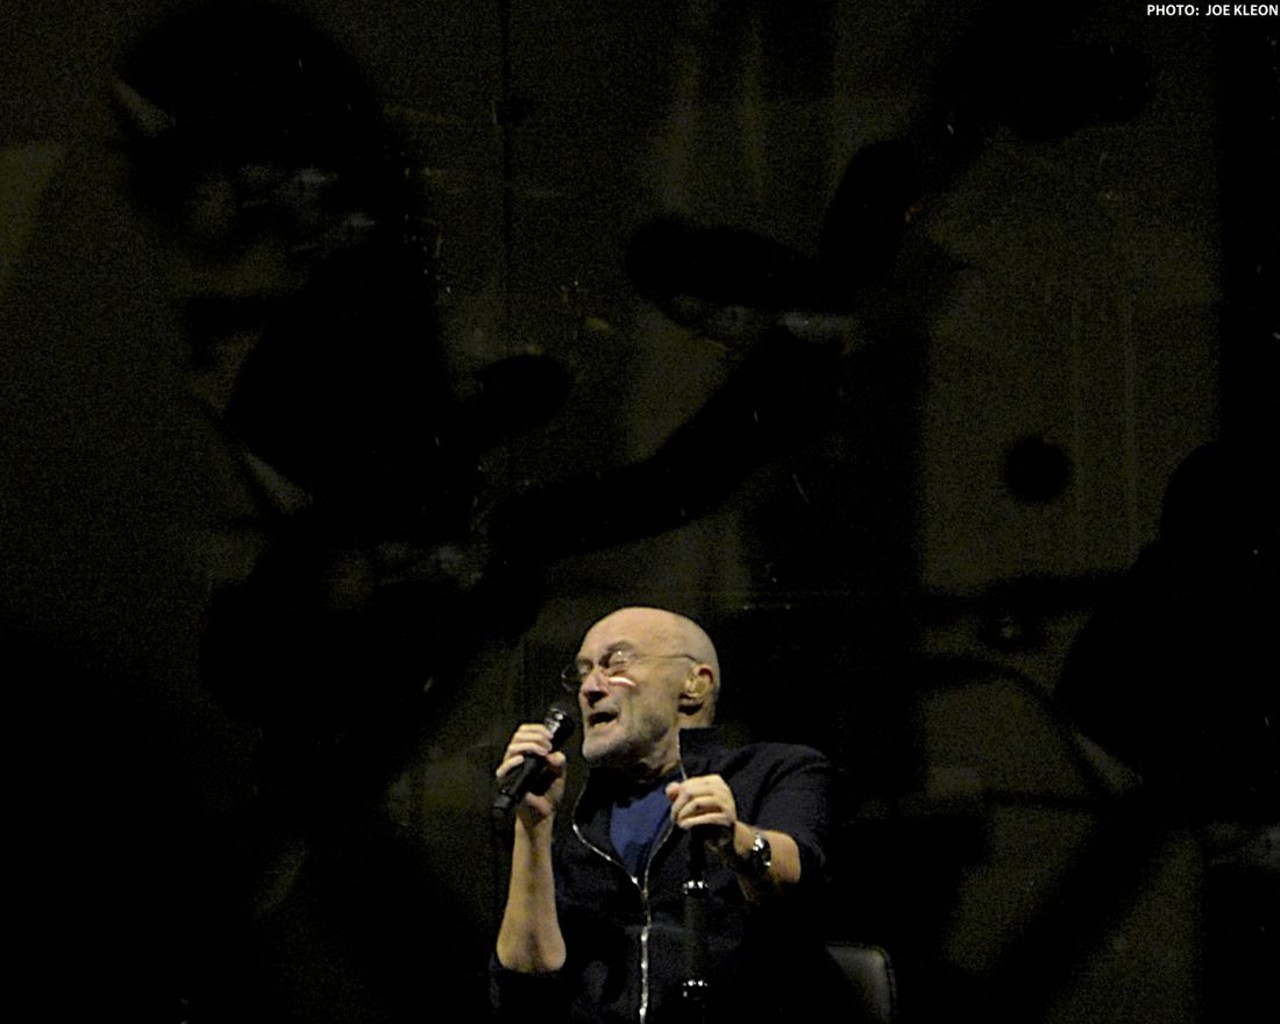 Phil Collins Performing at the Q